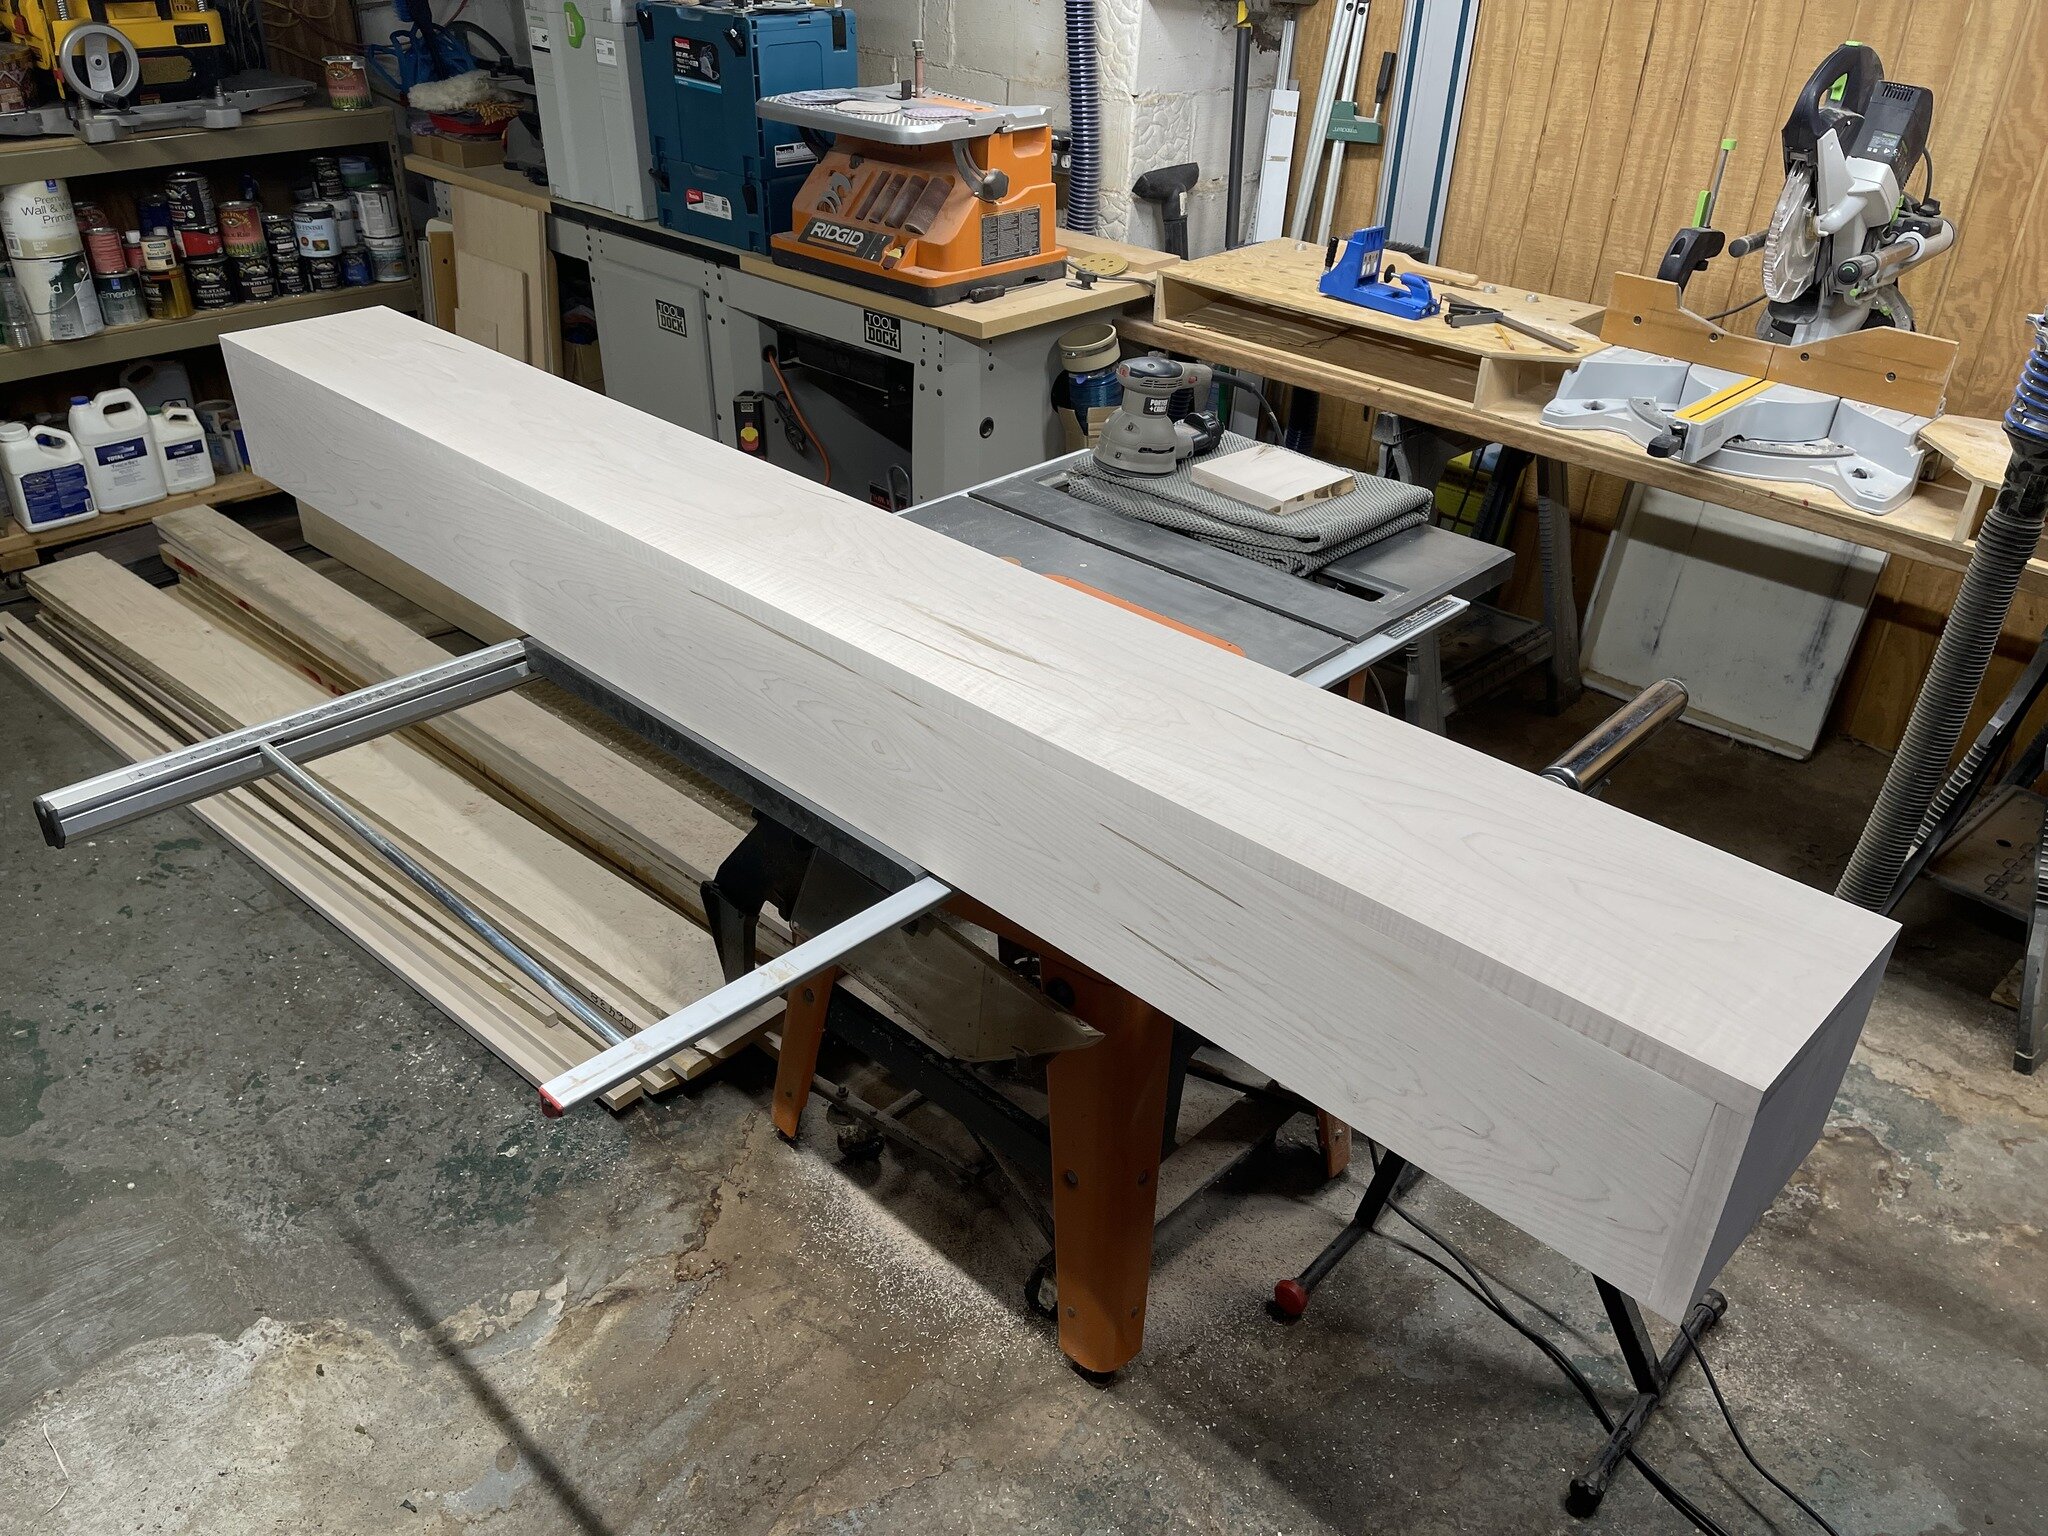 Great progress milling down some beautiful Maple and building this ledger mantle today. Look at those tight seams! Off to finishing tomorrow!